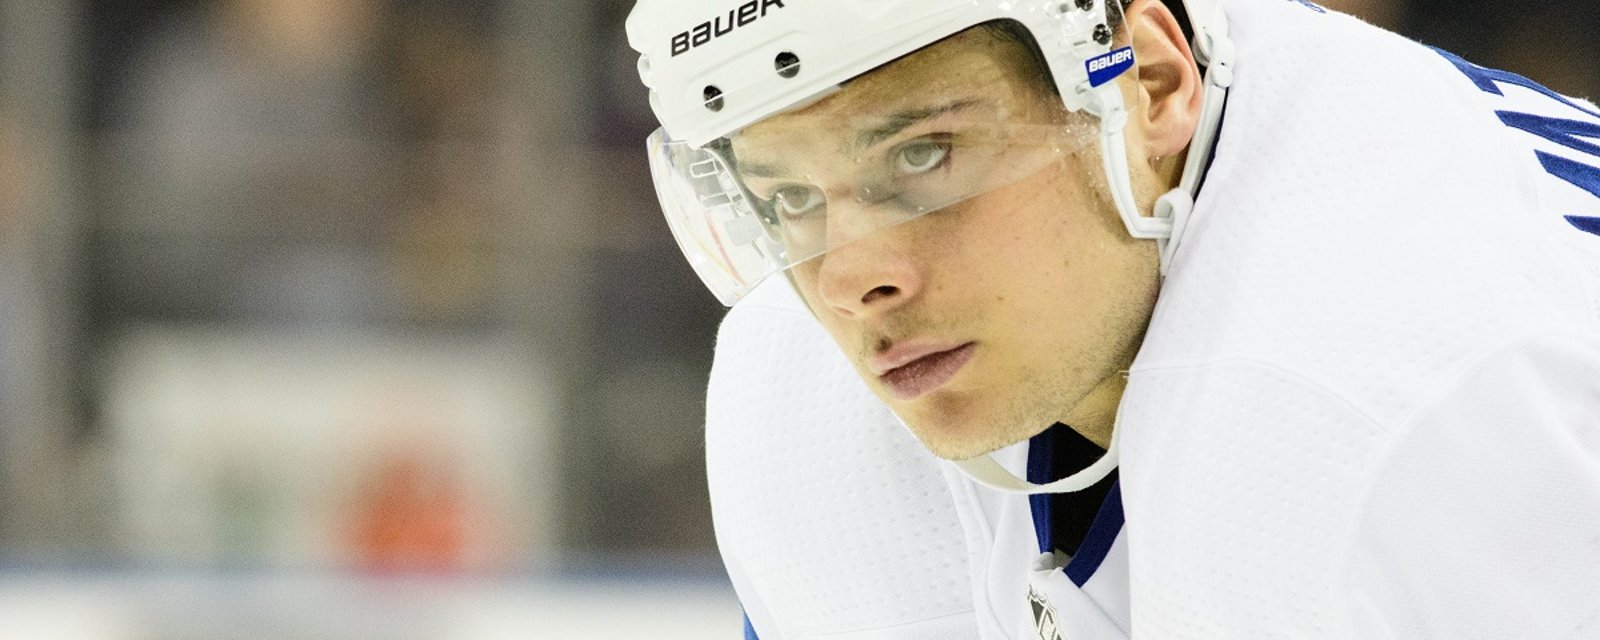 Rumor: Auston Matthews “would rather not play” with one of his teammates. 